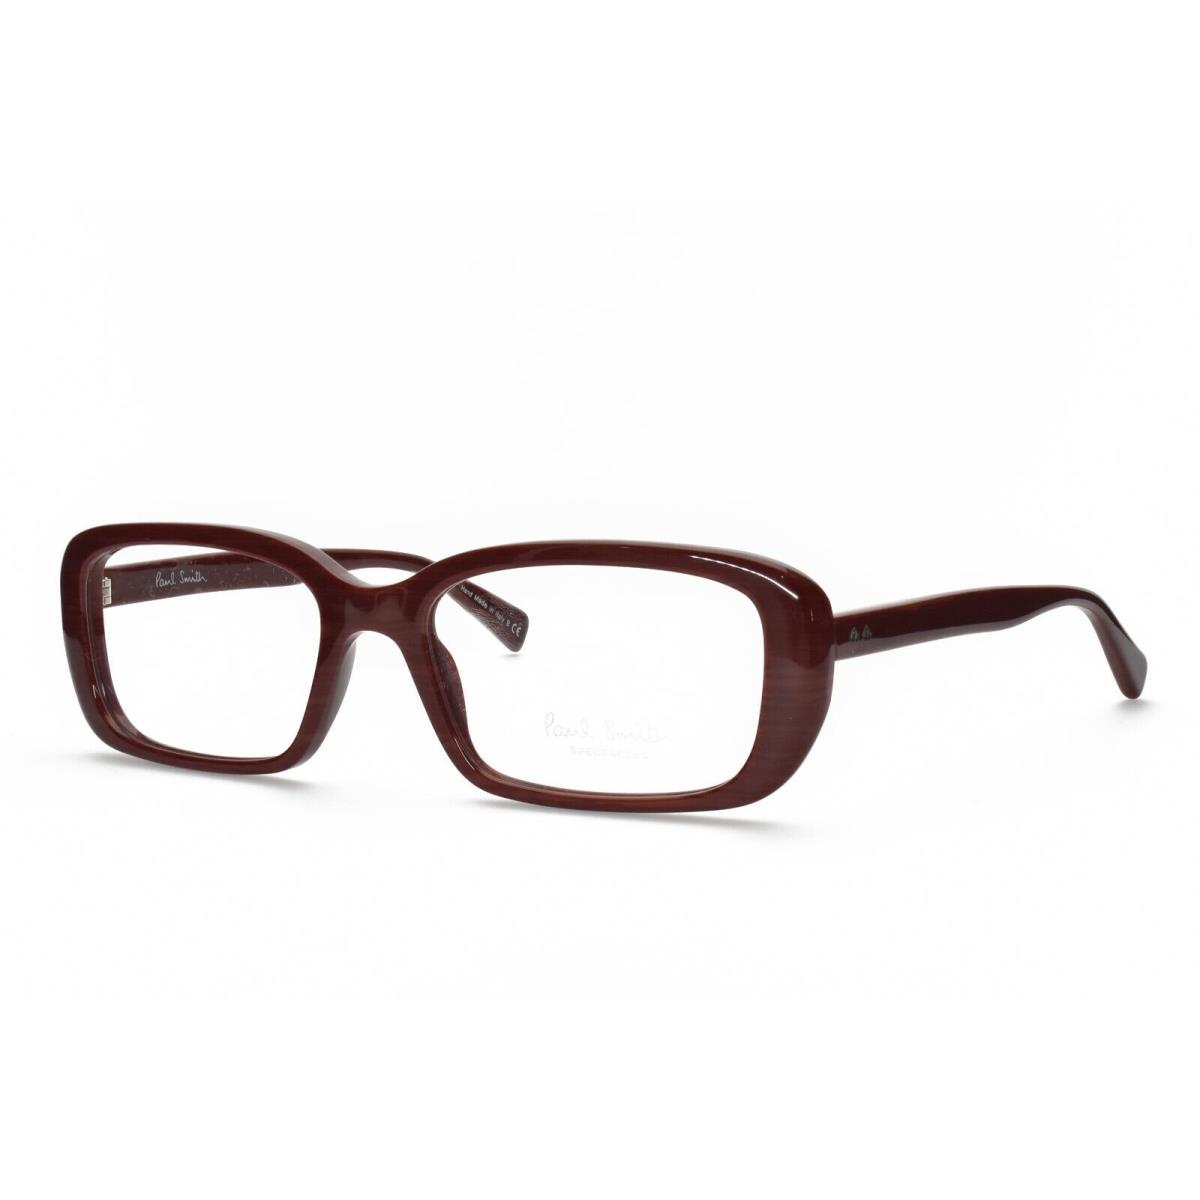 Paul Smith PS Bray 8119 1091 Eyeglasses Frames Only 53-17-135